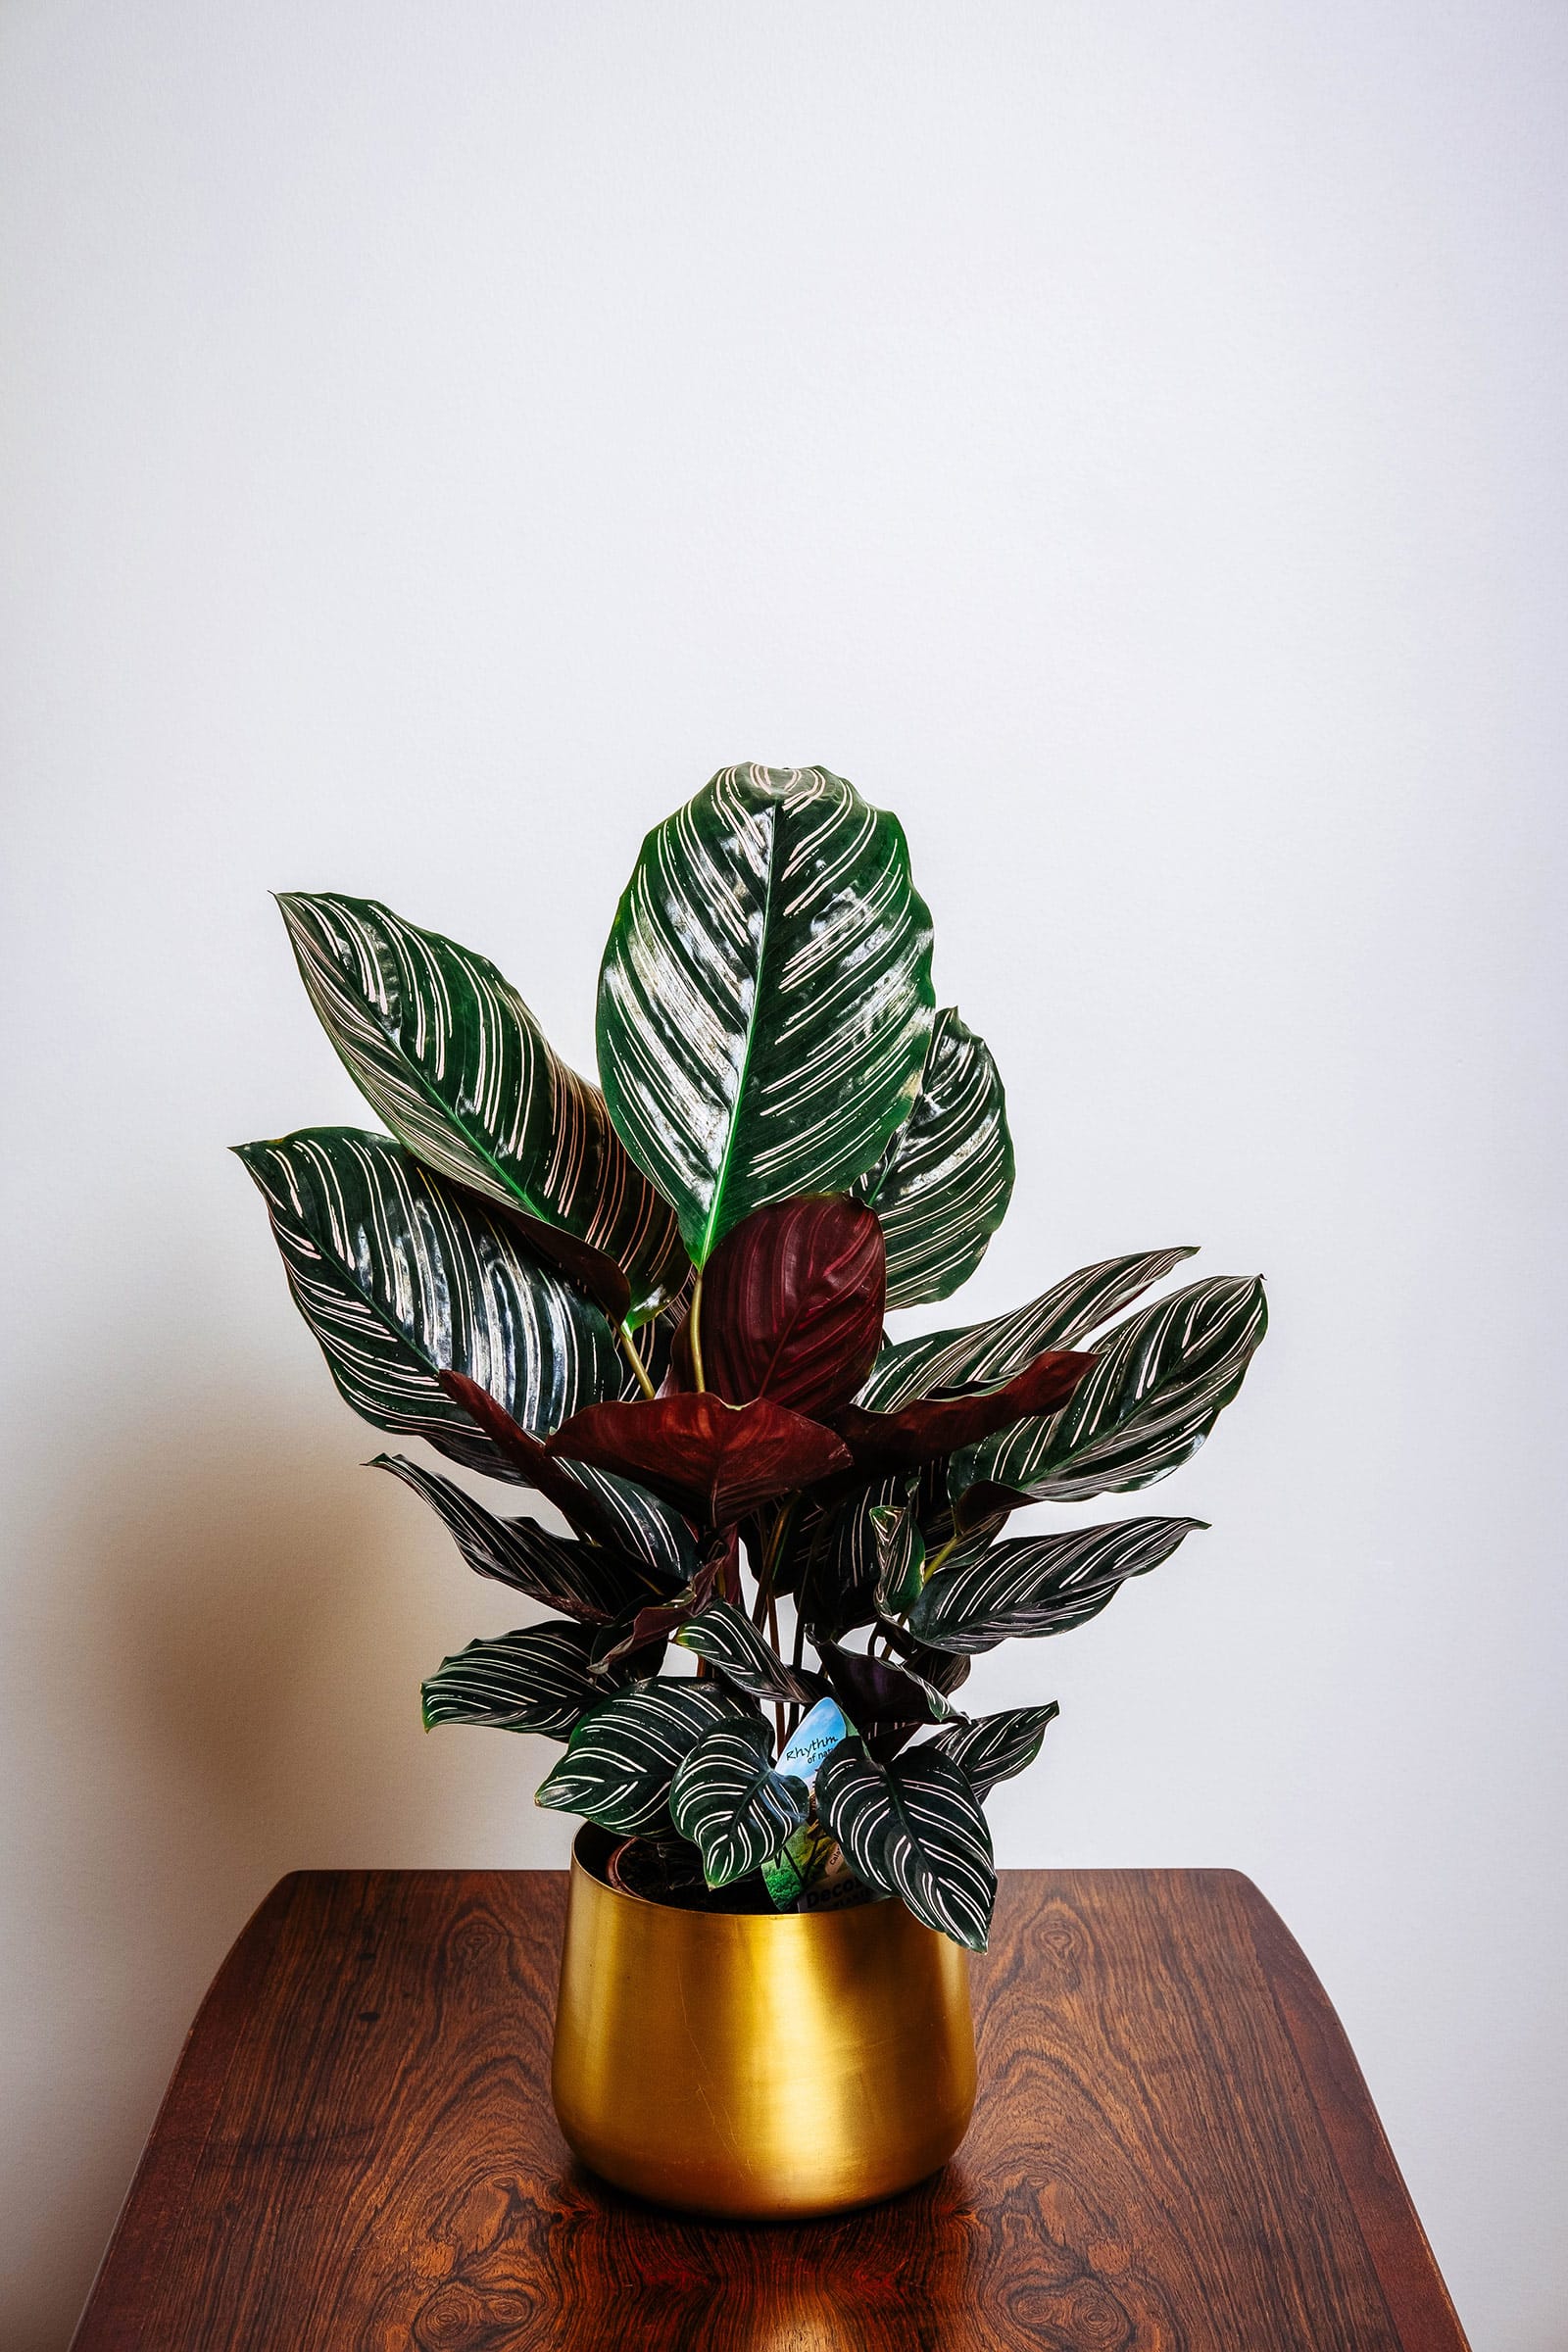 Pinstripe plant (Calathea ornata) in a brass pot on a dark wooden table against a white wall